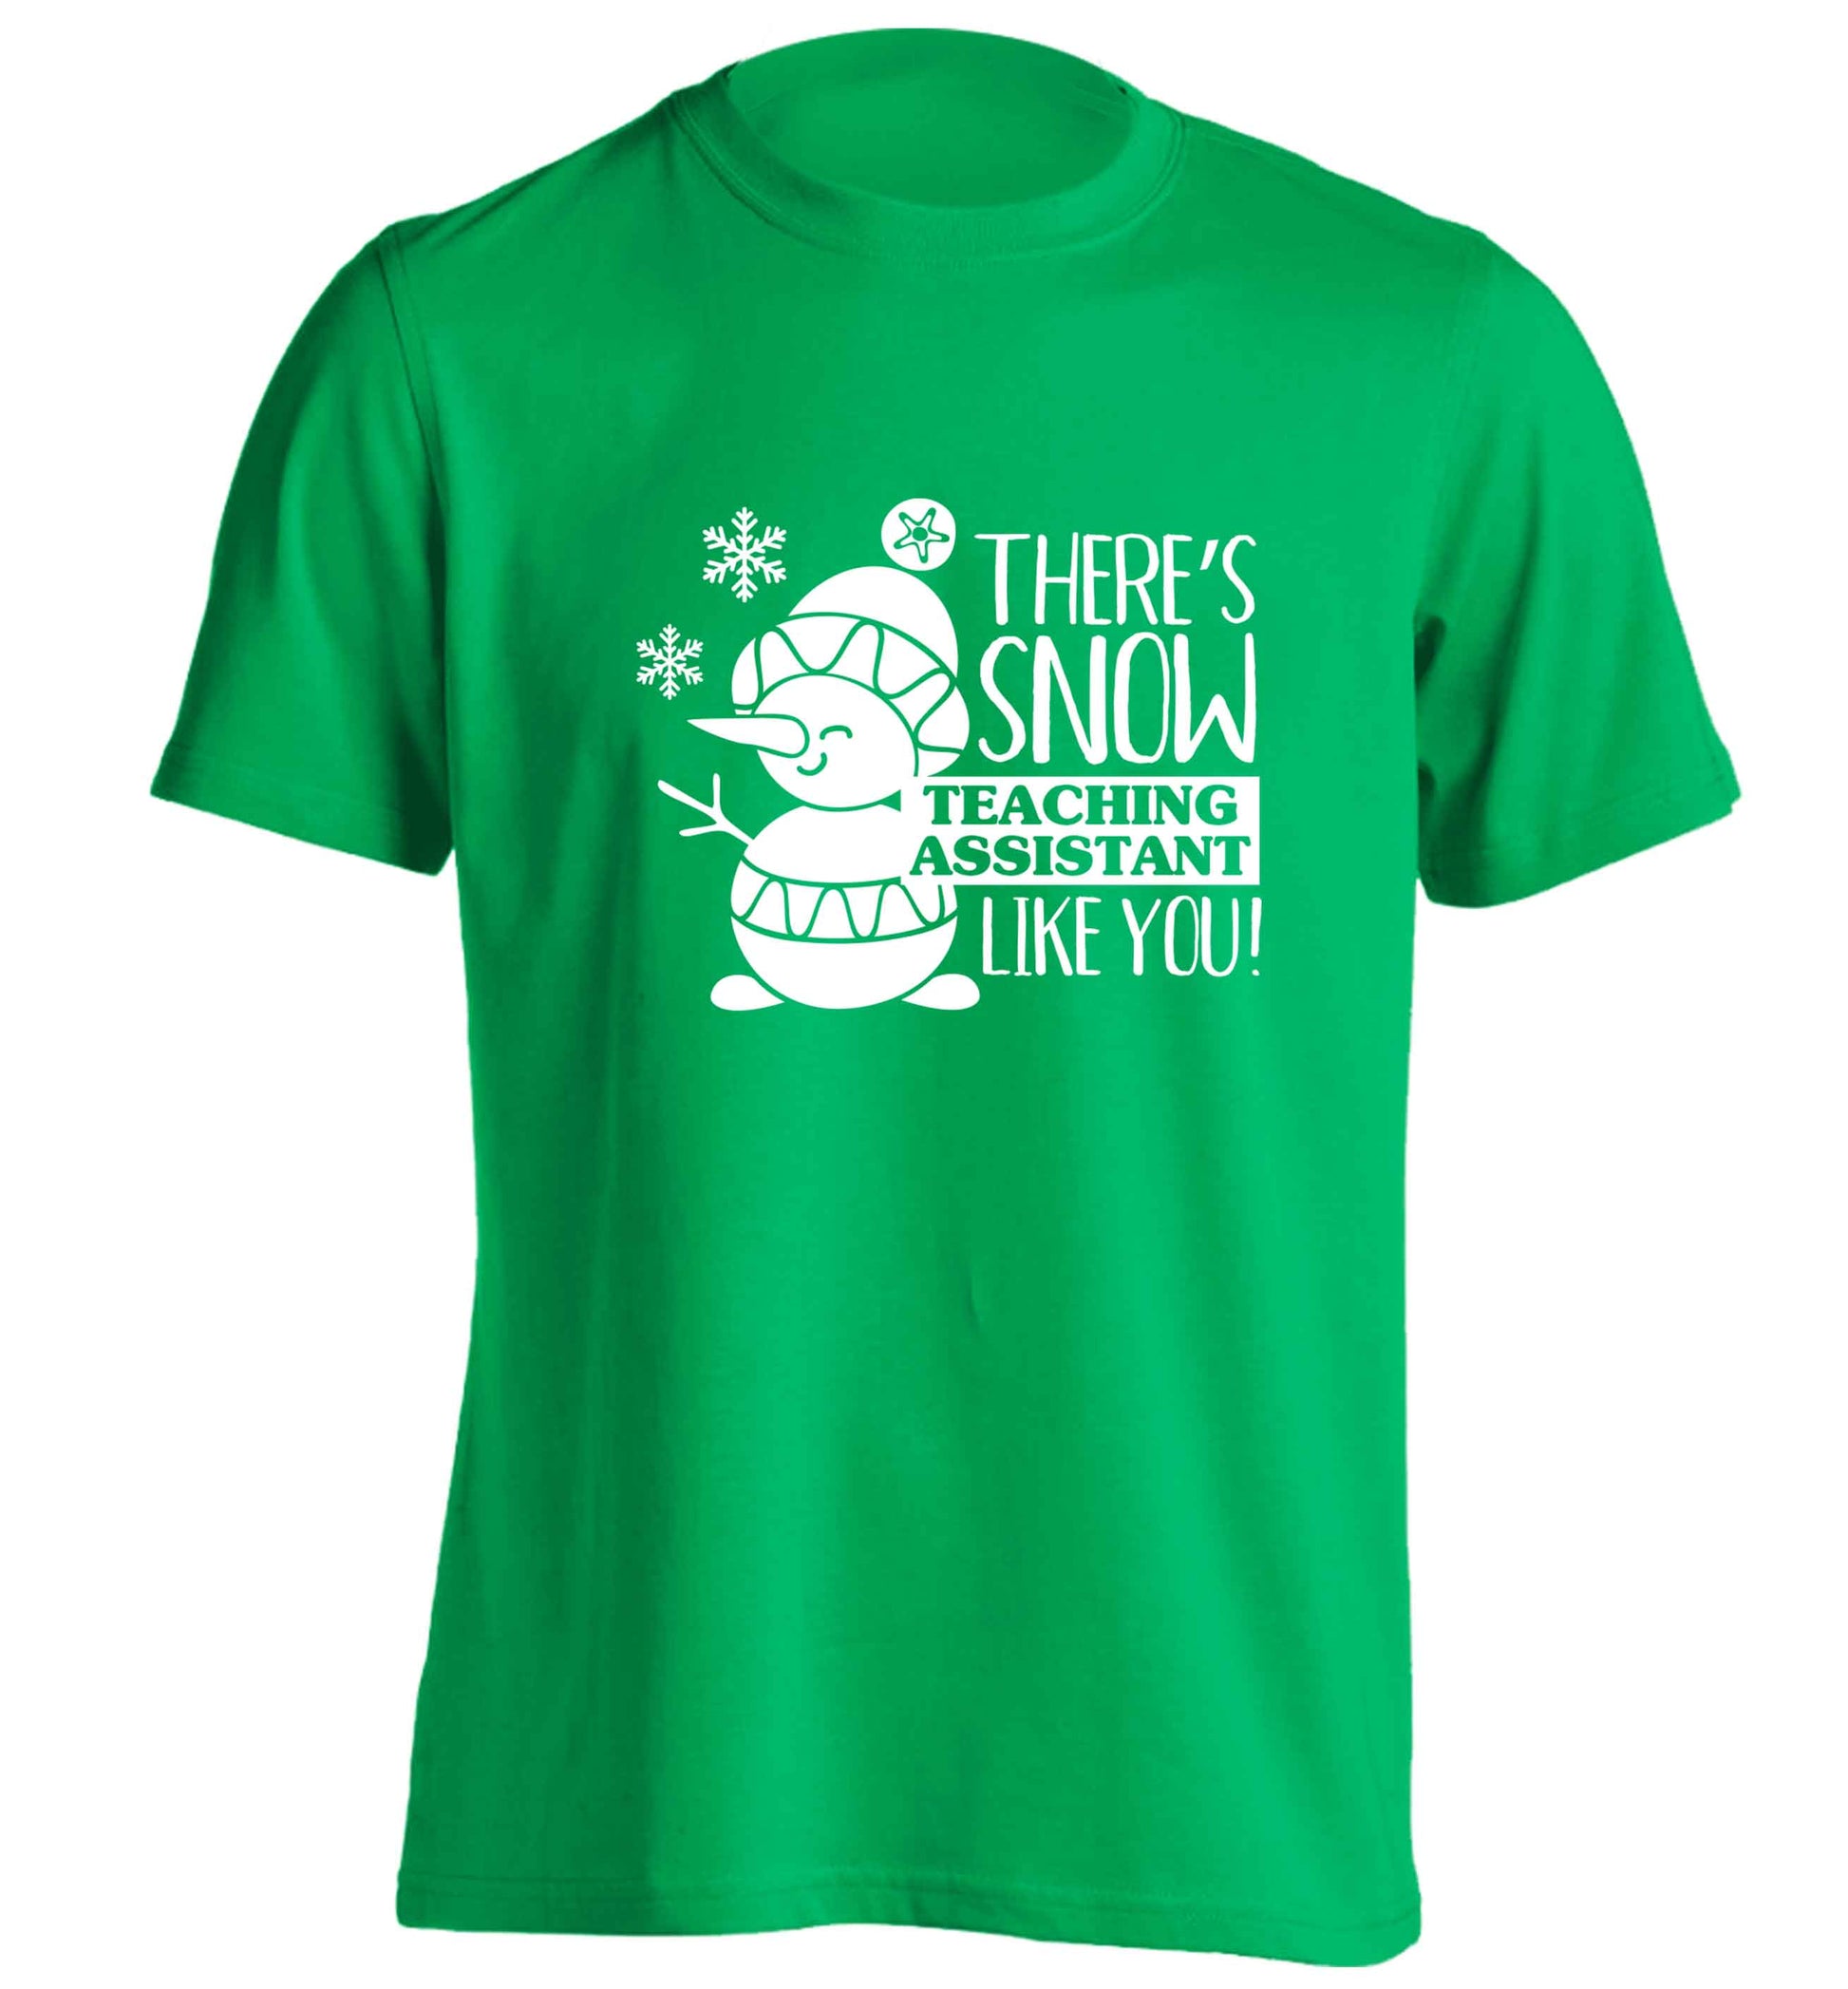 There's snow teaching assistant like you adults unisex green Tshirt 2XL